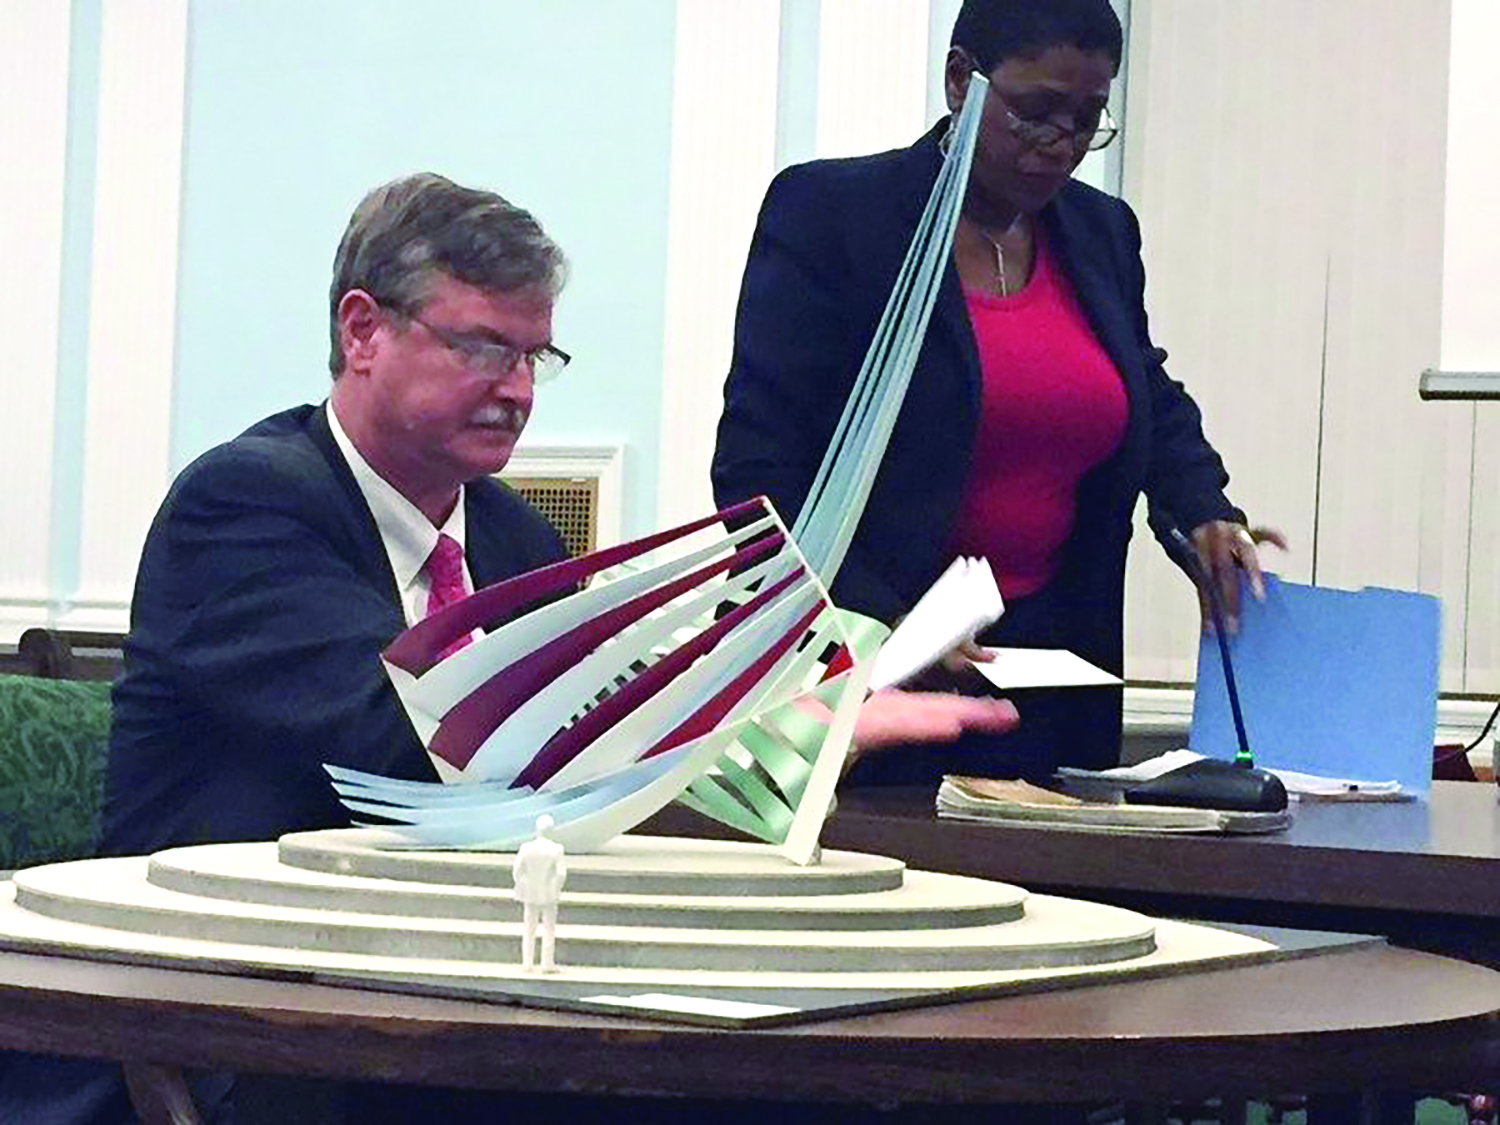 Mayor Paul Dyster is shown with a model of a sculpture he plans for a small traffic circle on Rainbow Blvd. The sculpture will cost taxpayers $472,000 of state, city and Greenway money.  Standing next to him is City Administrator Donna Owens who will be axed - but not until after she stays on past her eighth anniversary so she can pick up additional taxpayer funded goodies. 
One thing about Dyster: He is never transparent. He could have said, when announcing Owens’ departure date, that he wanted her to stay until she got one more year of benefits. But he didn’t. Sly.